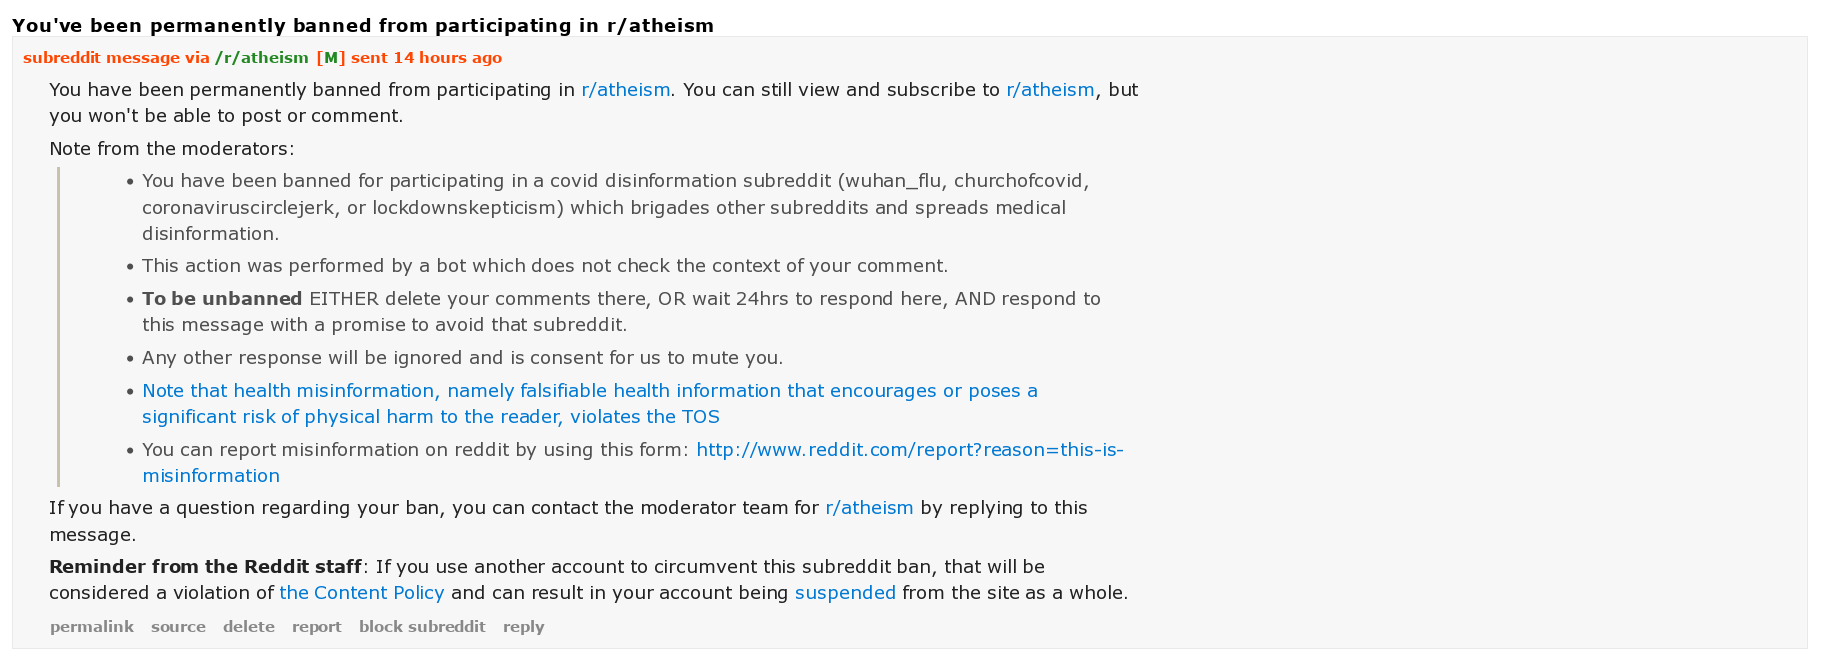 Moderation Message / Permanent Ban from /r/atheism